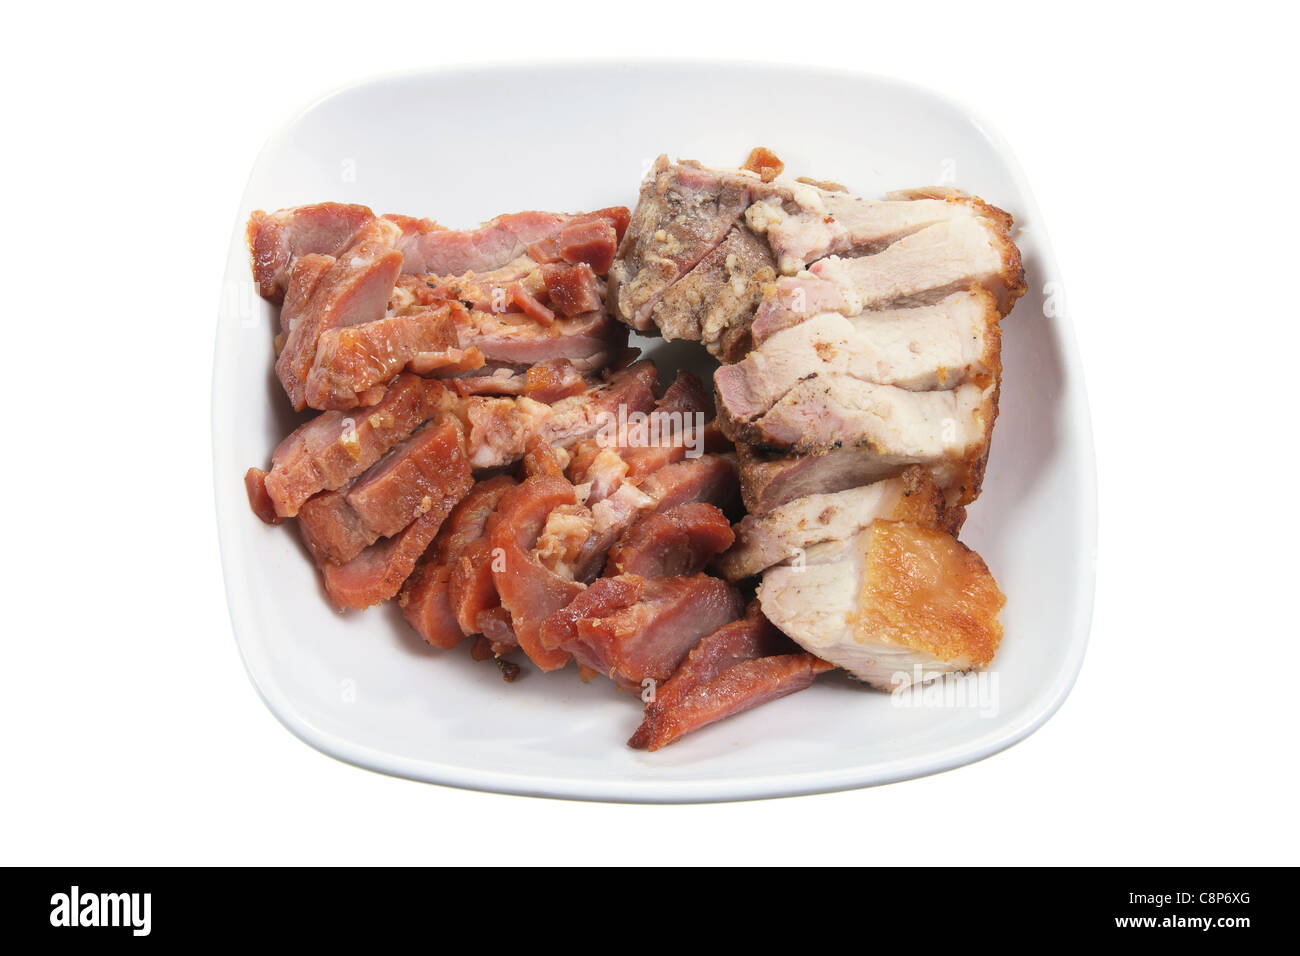 Plate of Chinese Barbecued Pork Stock Photo